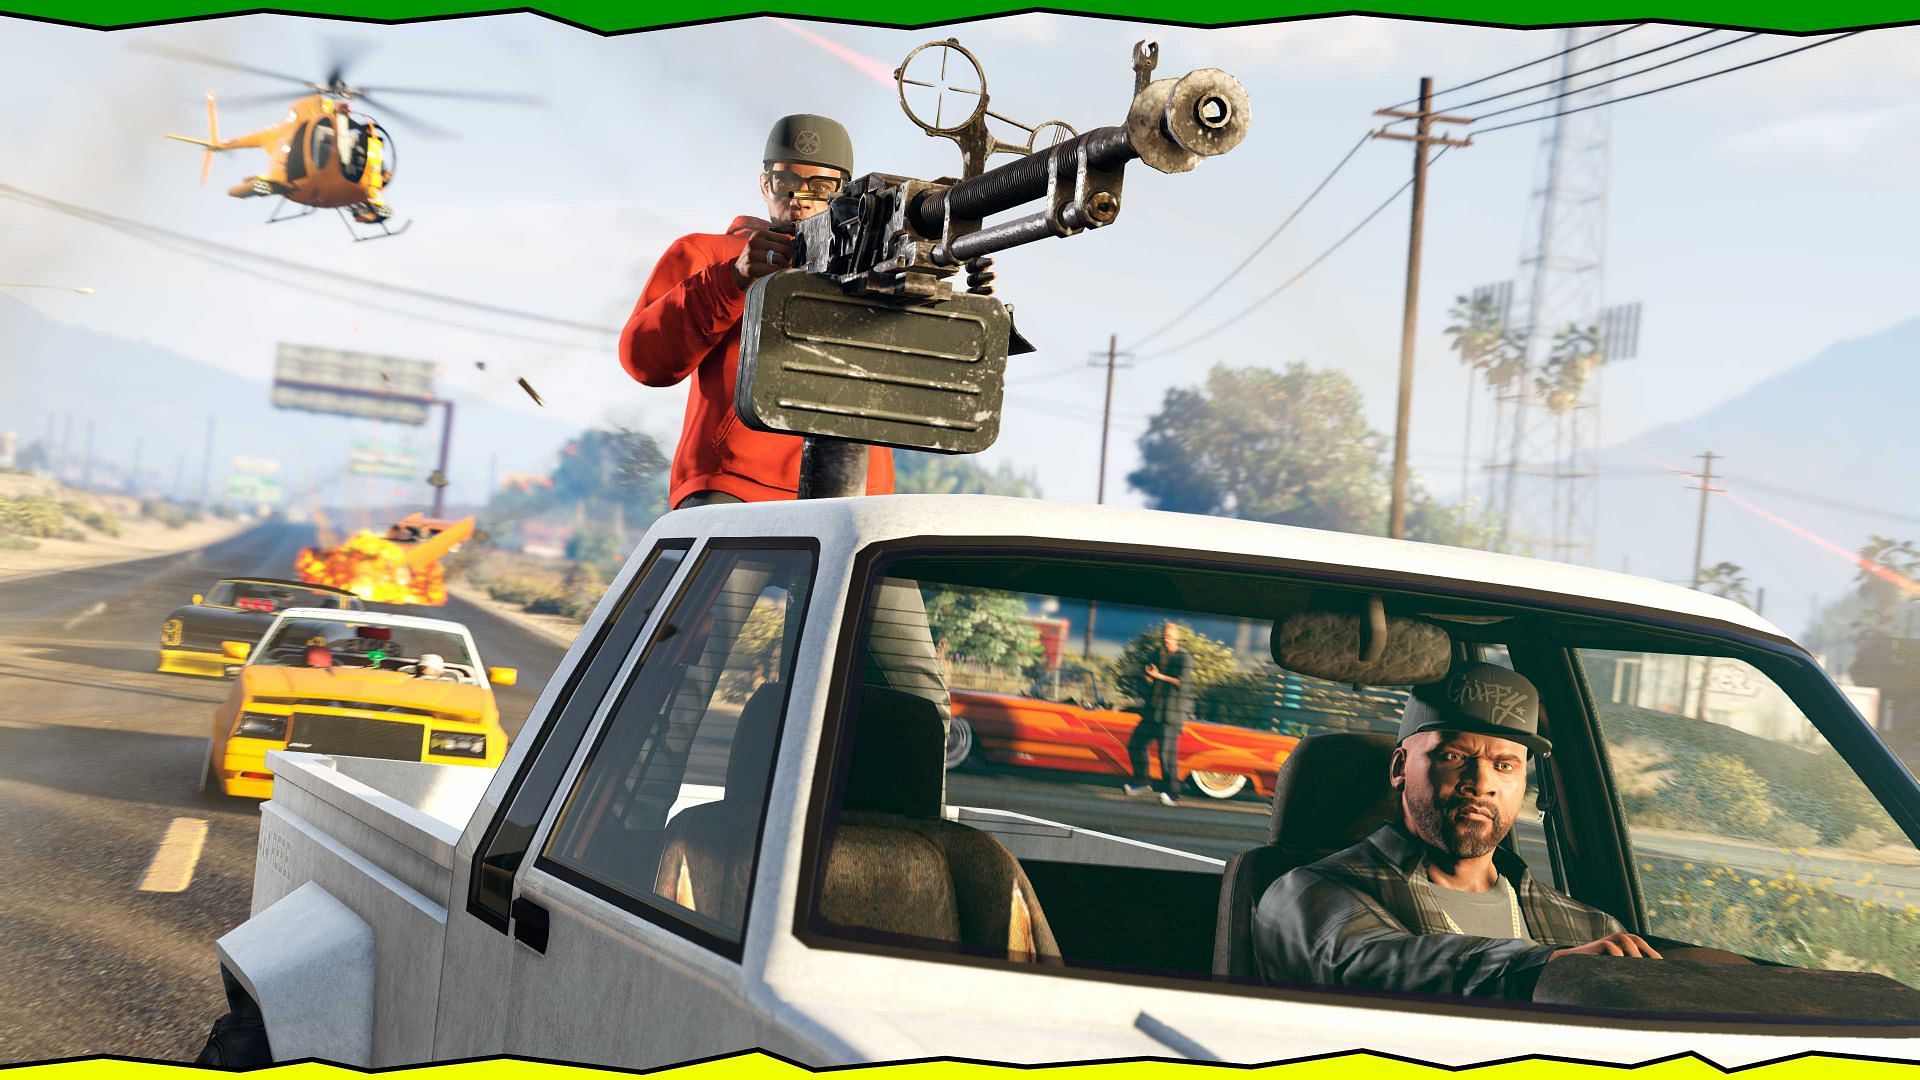 Franklin and Lamar taking care of some business (Image via Rockstar Games)